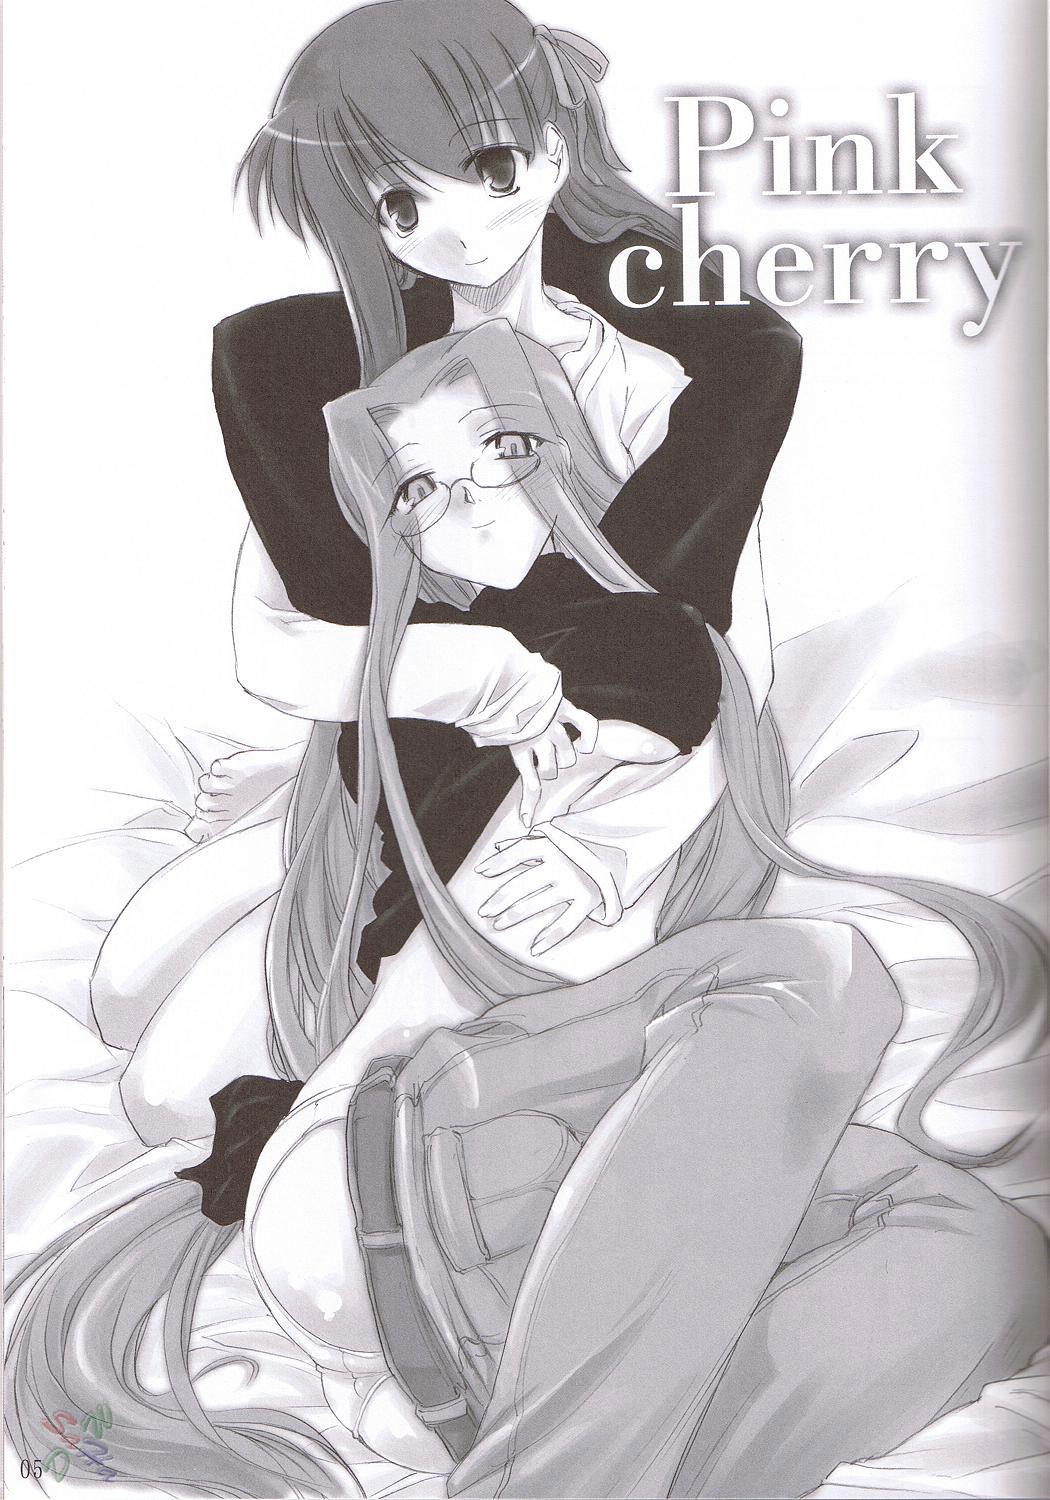 Young Tits Pink Cherry - Fate stay night Trap - Page 4